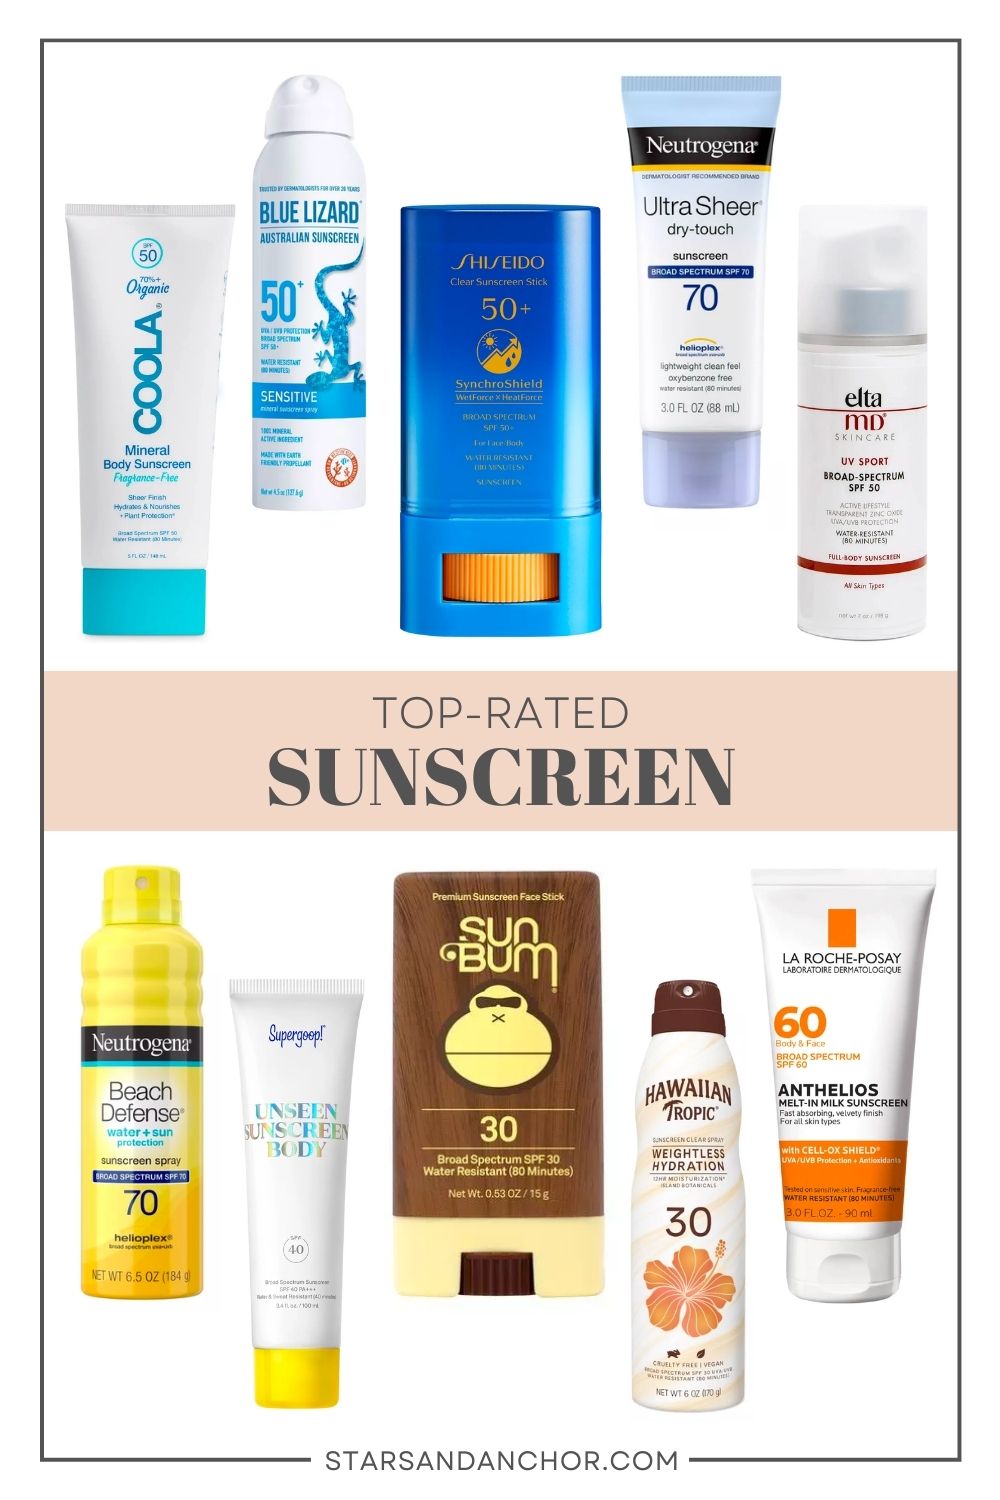 A graphic showing the 10 best sunscreen products that says "top-rated sunscreen."